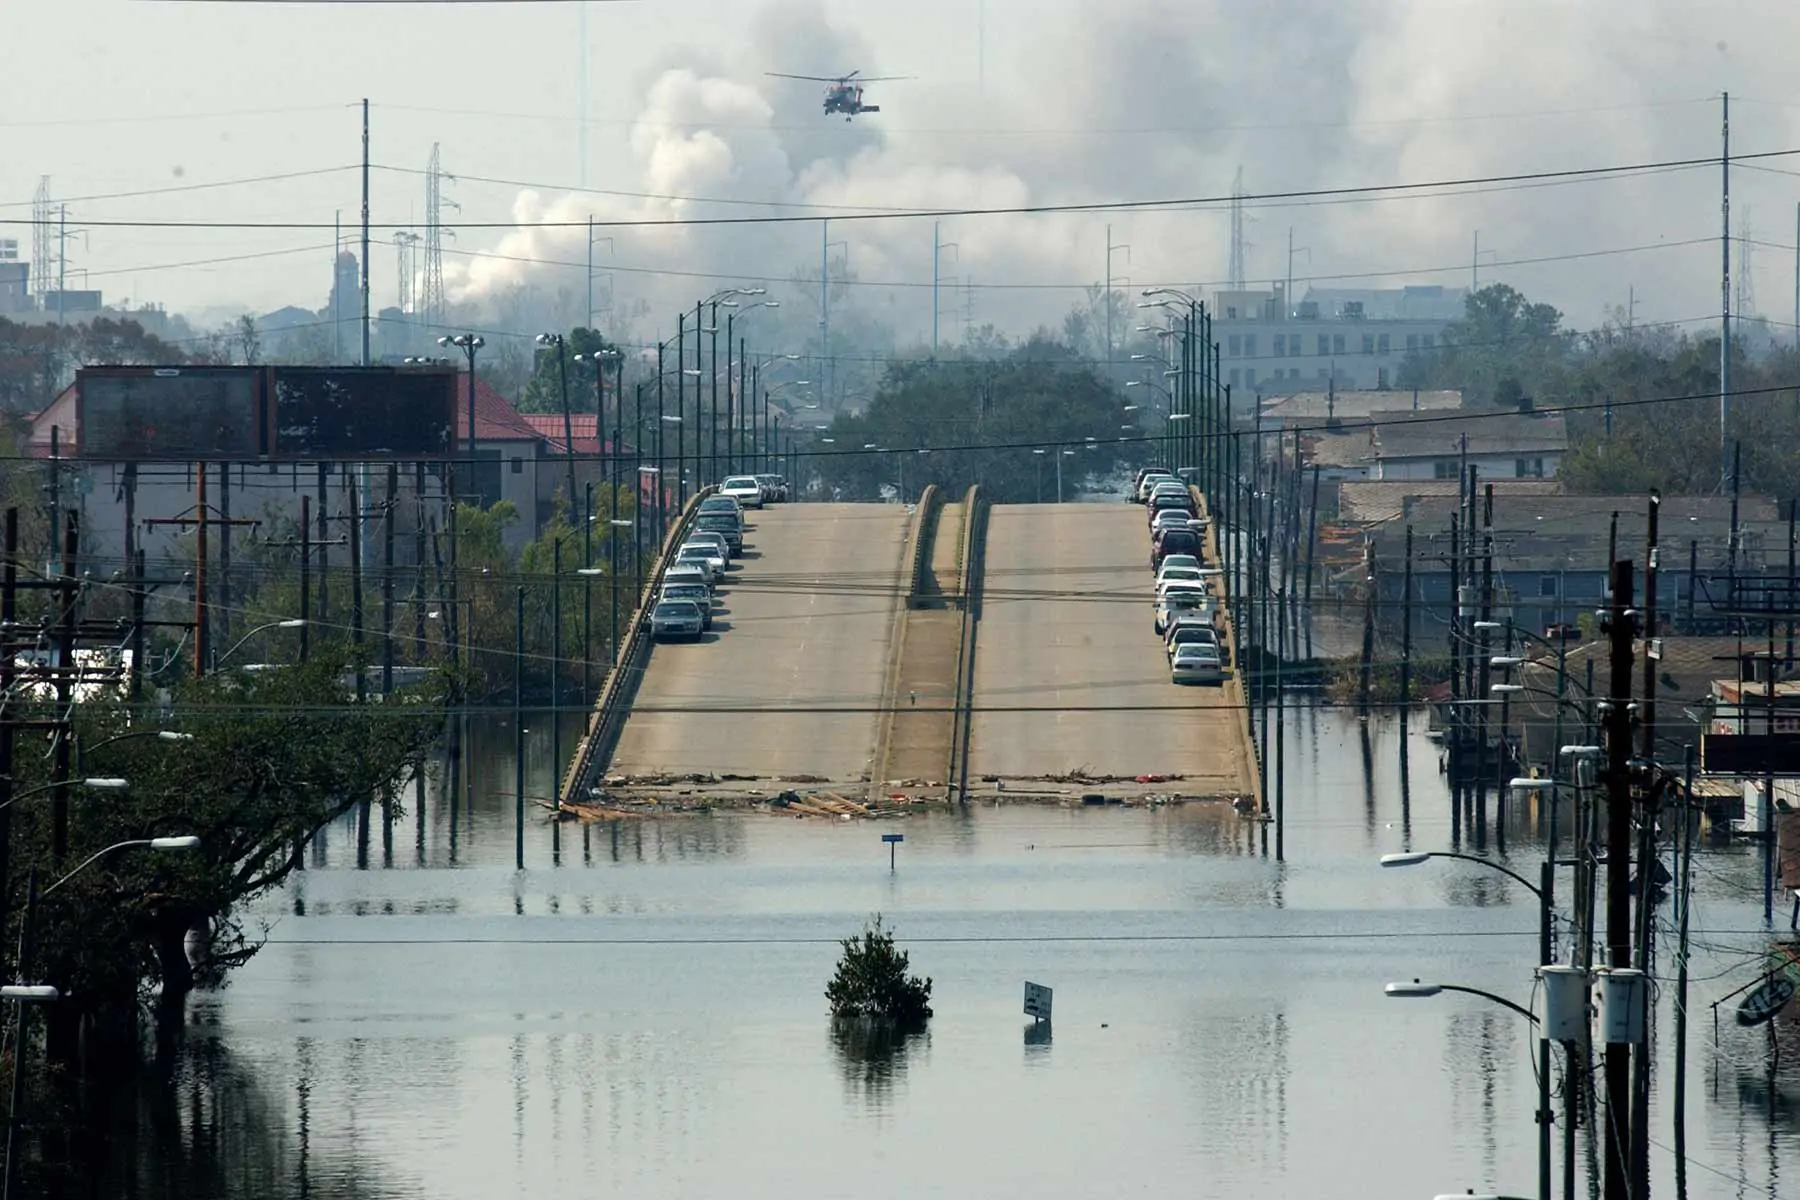 Flooding scene shows water up half way up street lamps with a bridge in the background and smoke.